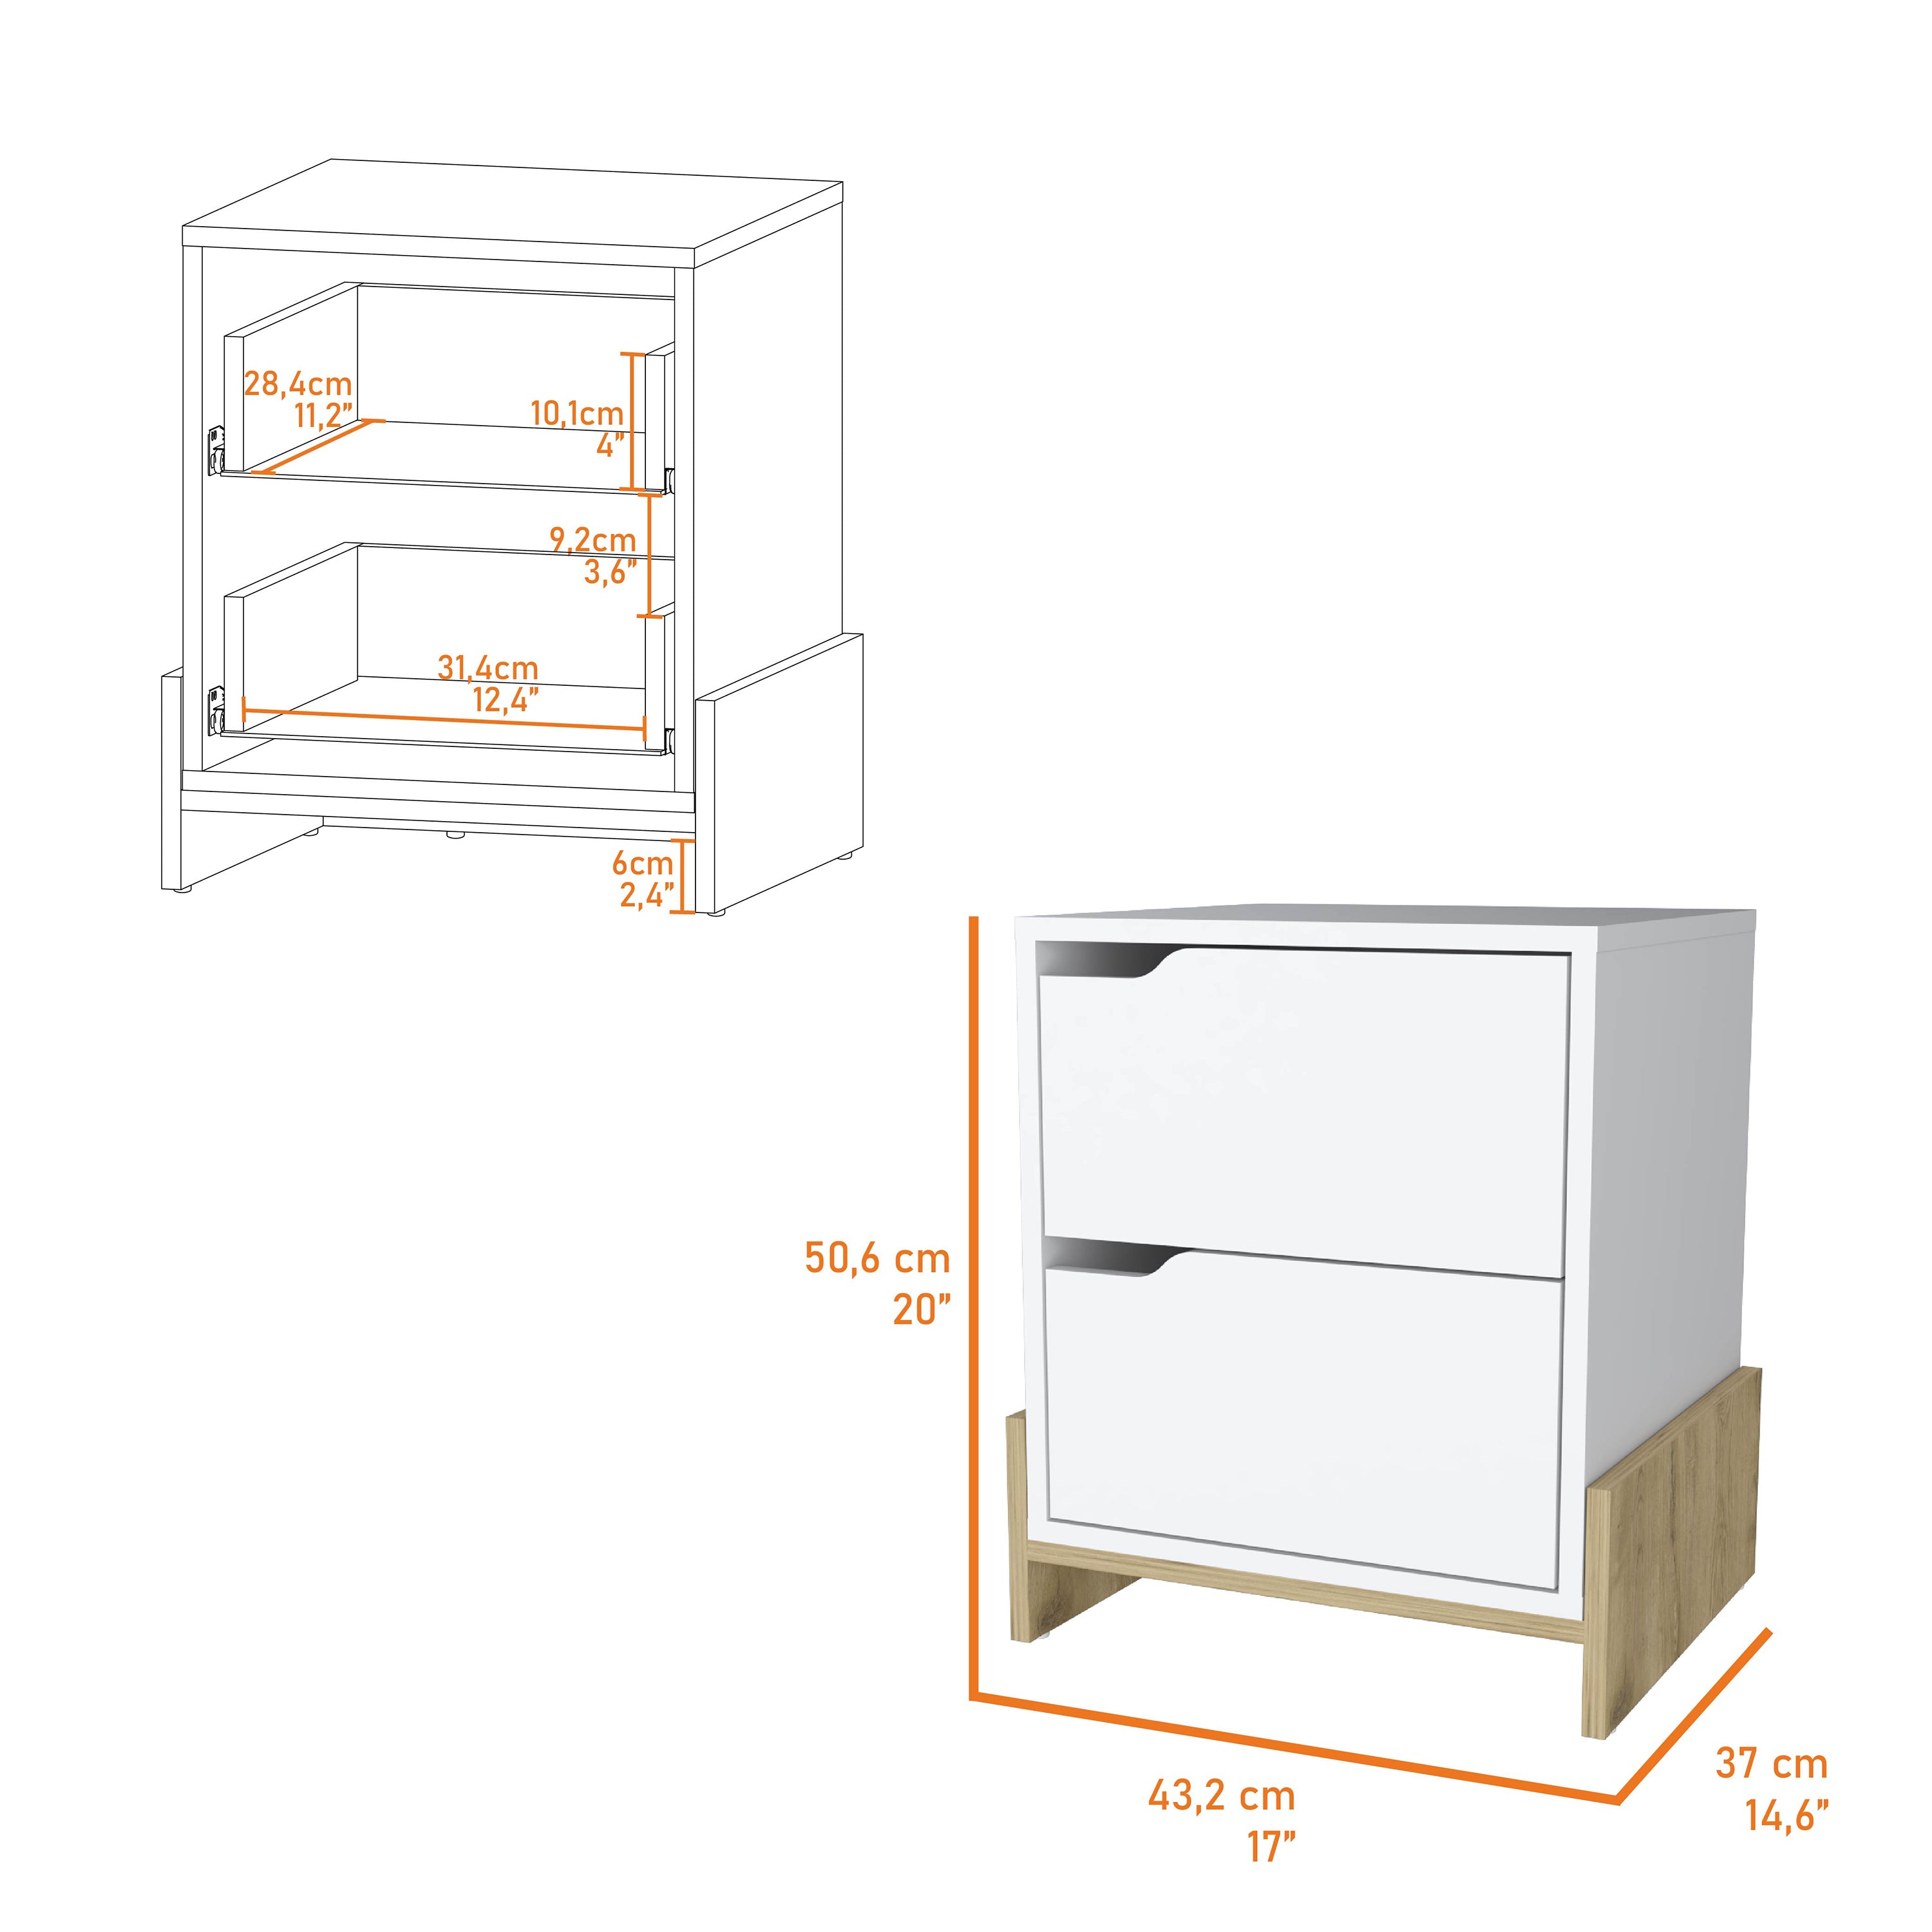 ZNTS Ralston 2-Drawer Nightstand in White and Macadamia B062111736